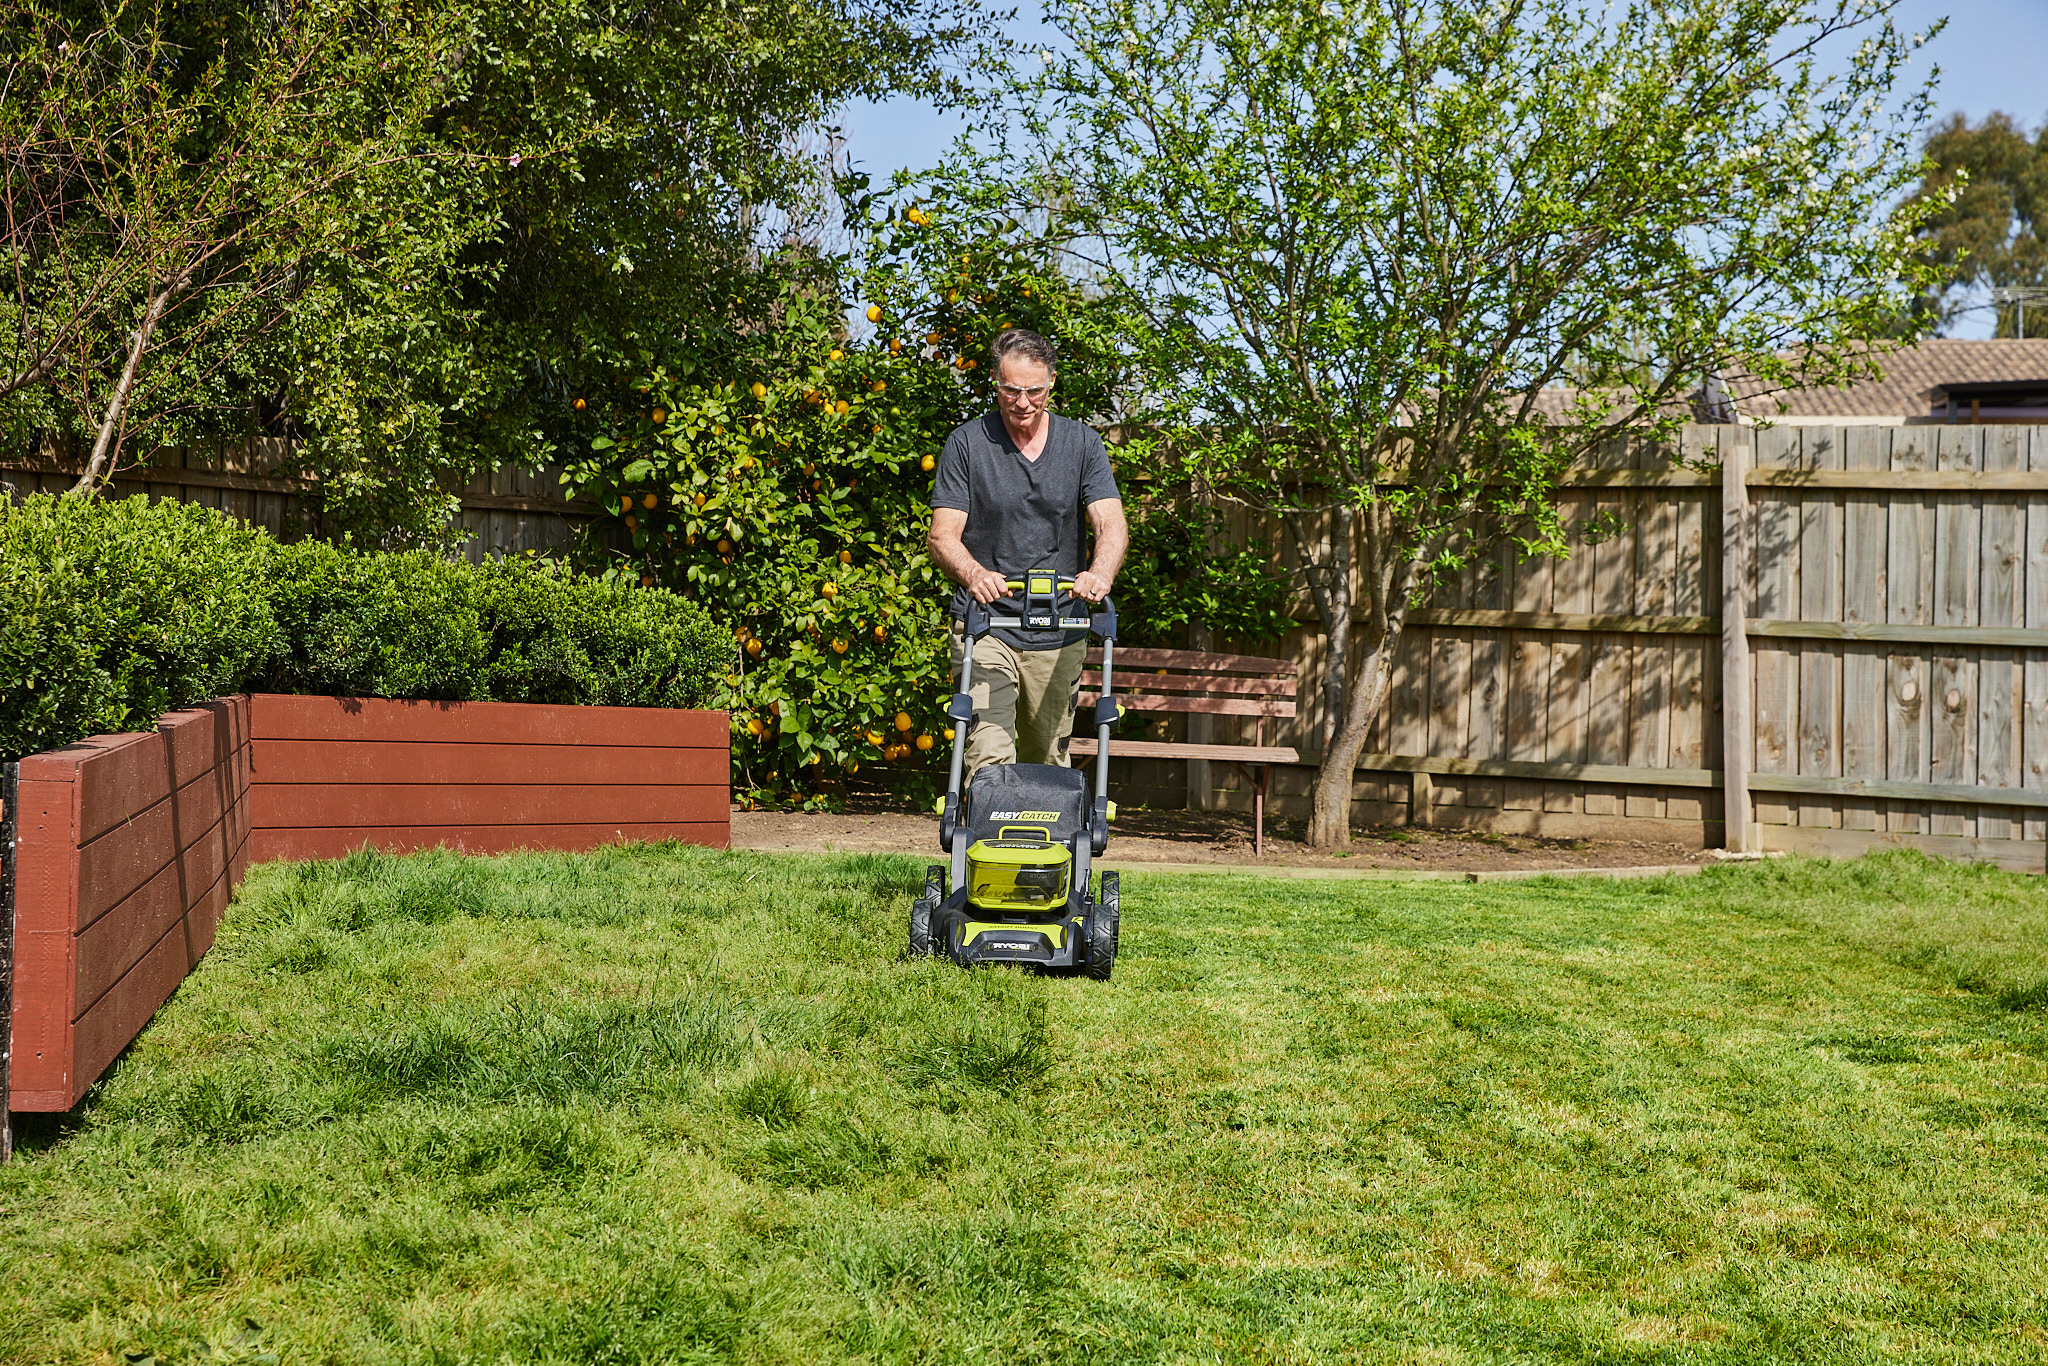 A man uses a Ryobi lawn mower to trim the grass in his backyard